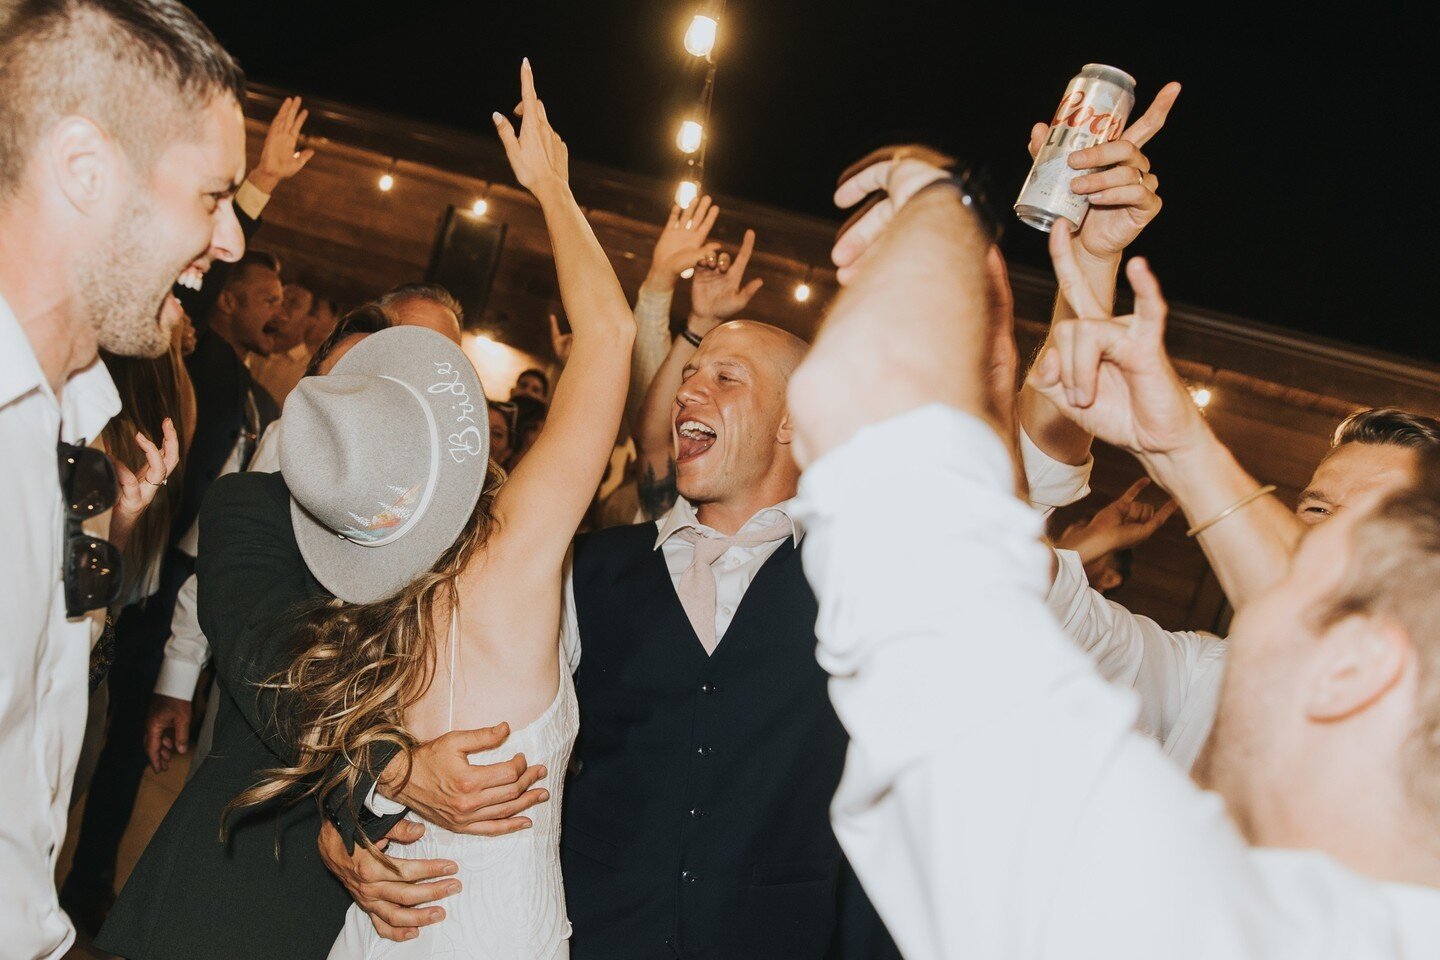 It's Monday...but can we pretend it's Friday?⁠
⁠
10/10 recommend a dance party under the stars on your wedding night singing at the top of your lungs.